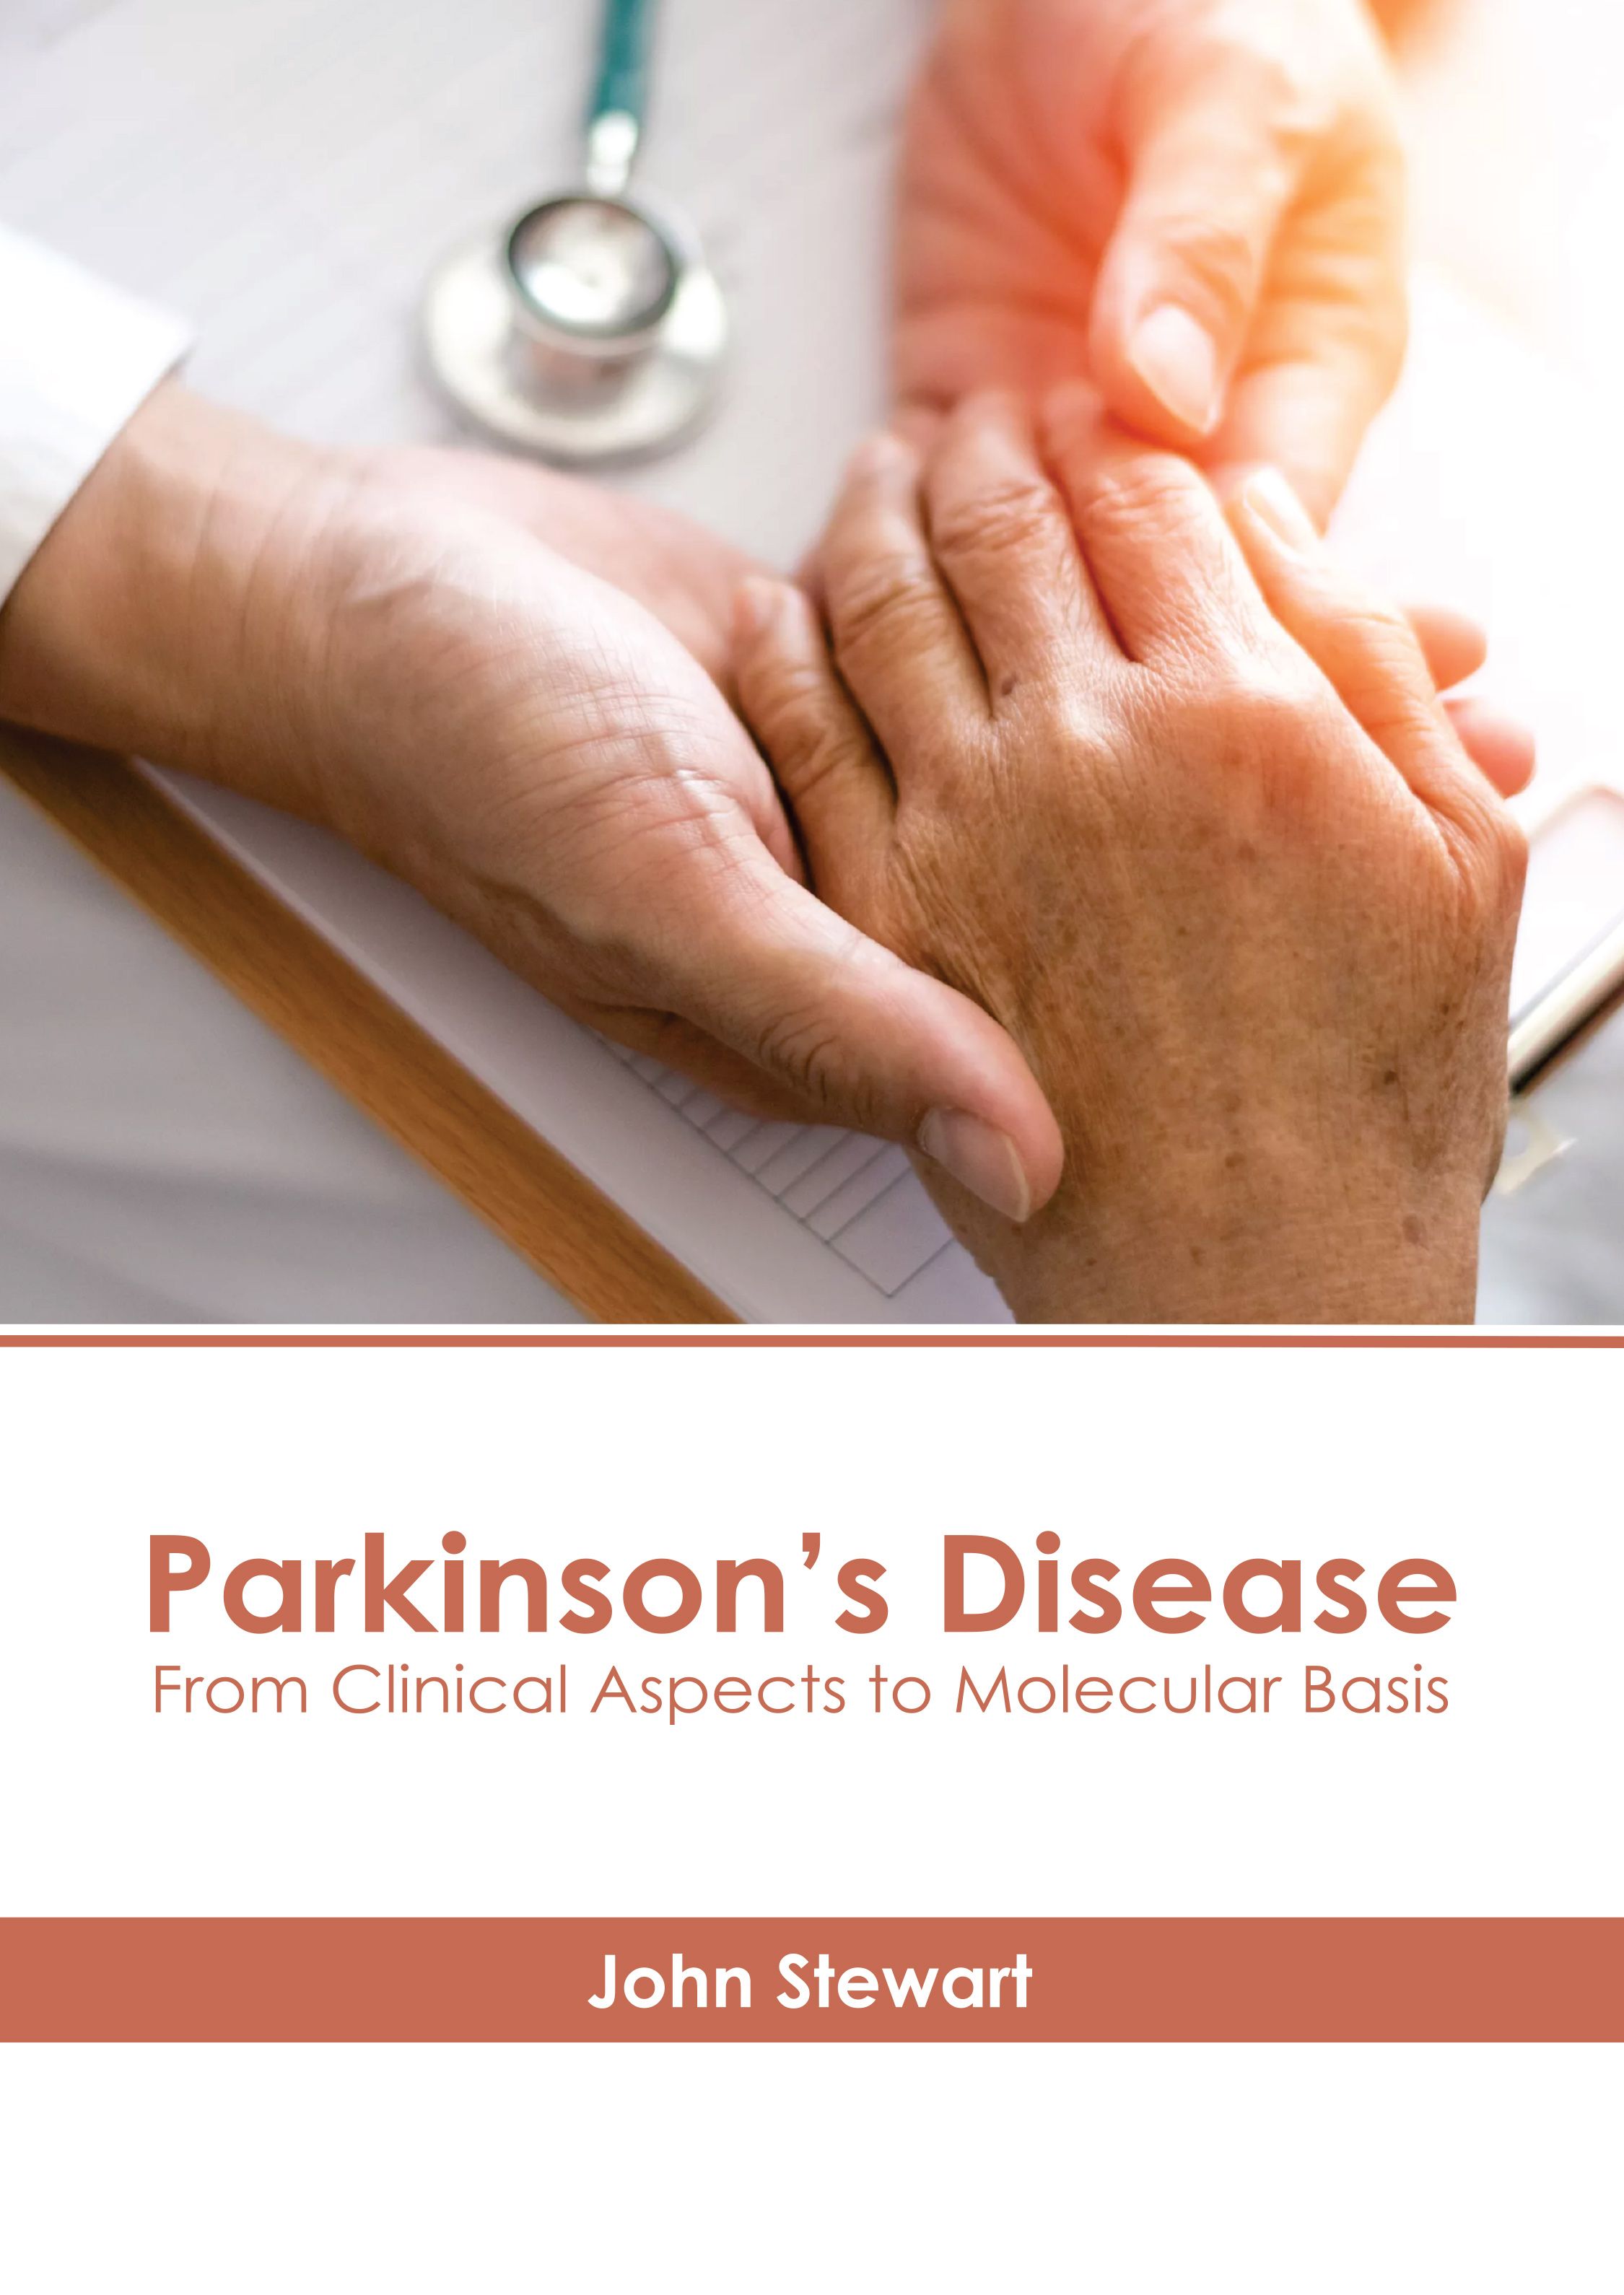 PARKINSON’S DISEASE: FROM CLINICAL ASPECTS TO MOLECULAR BASIS